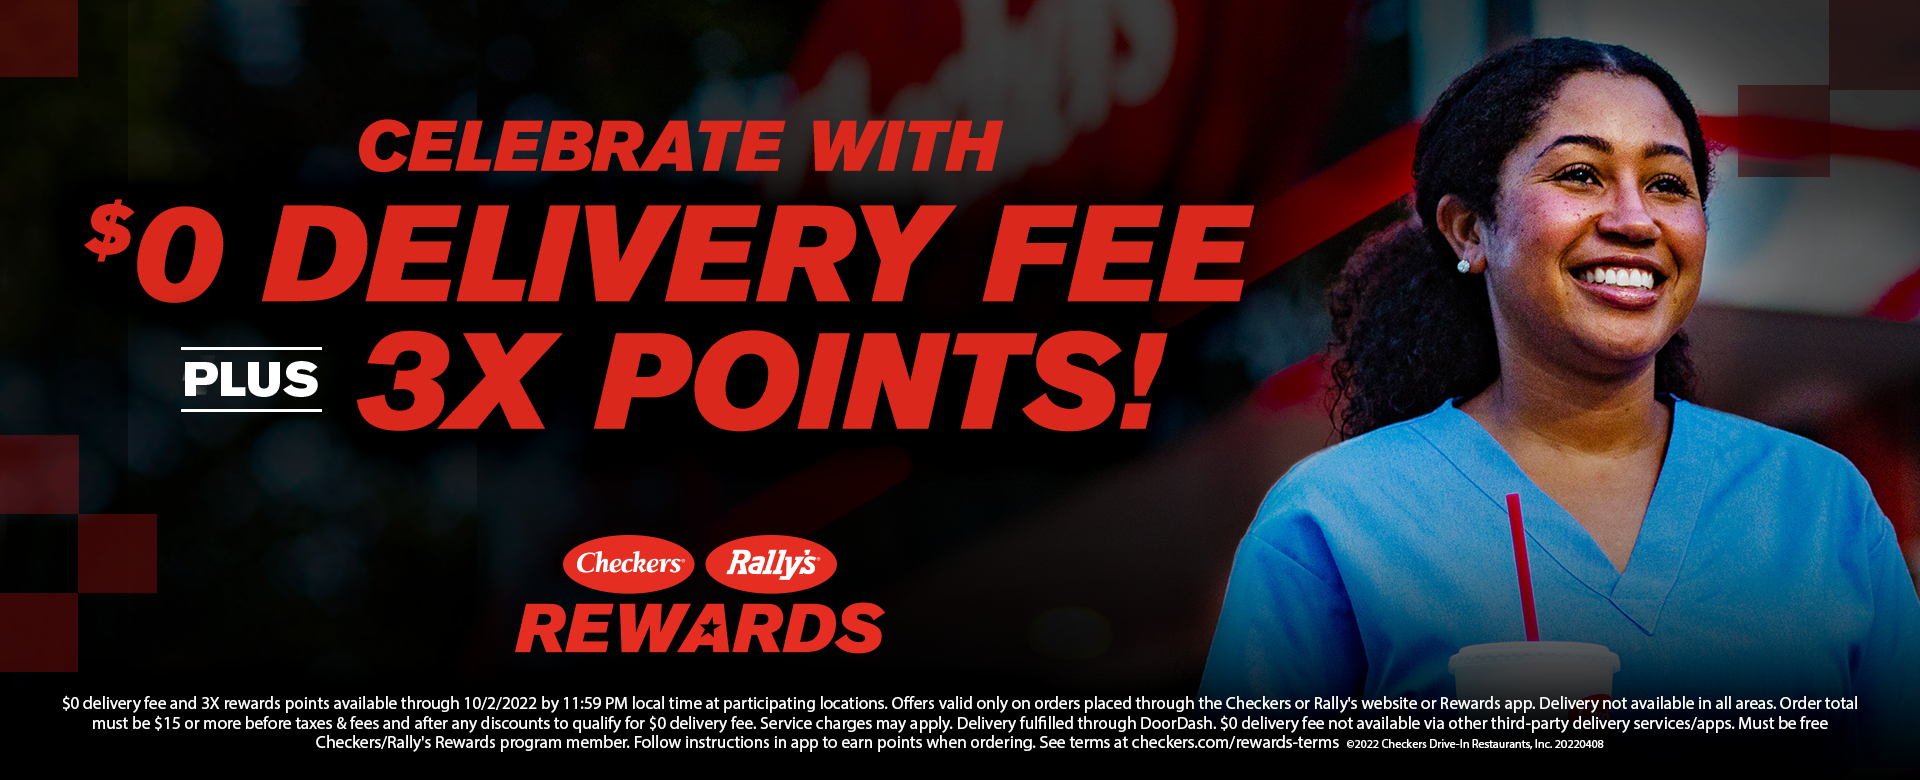 $0 delivery fee and 3x points for rewards members